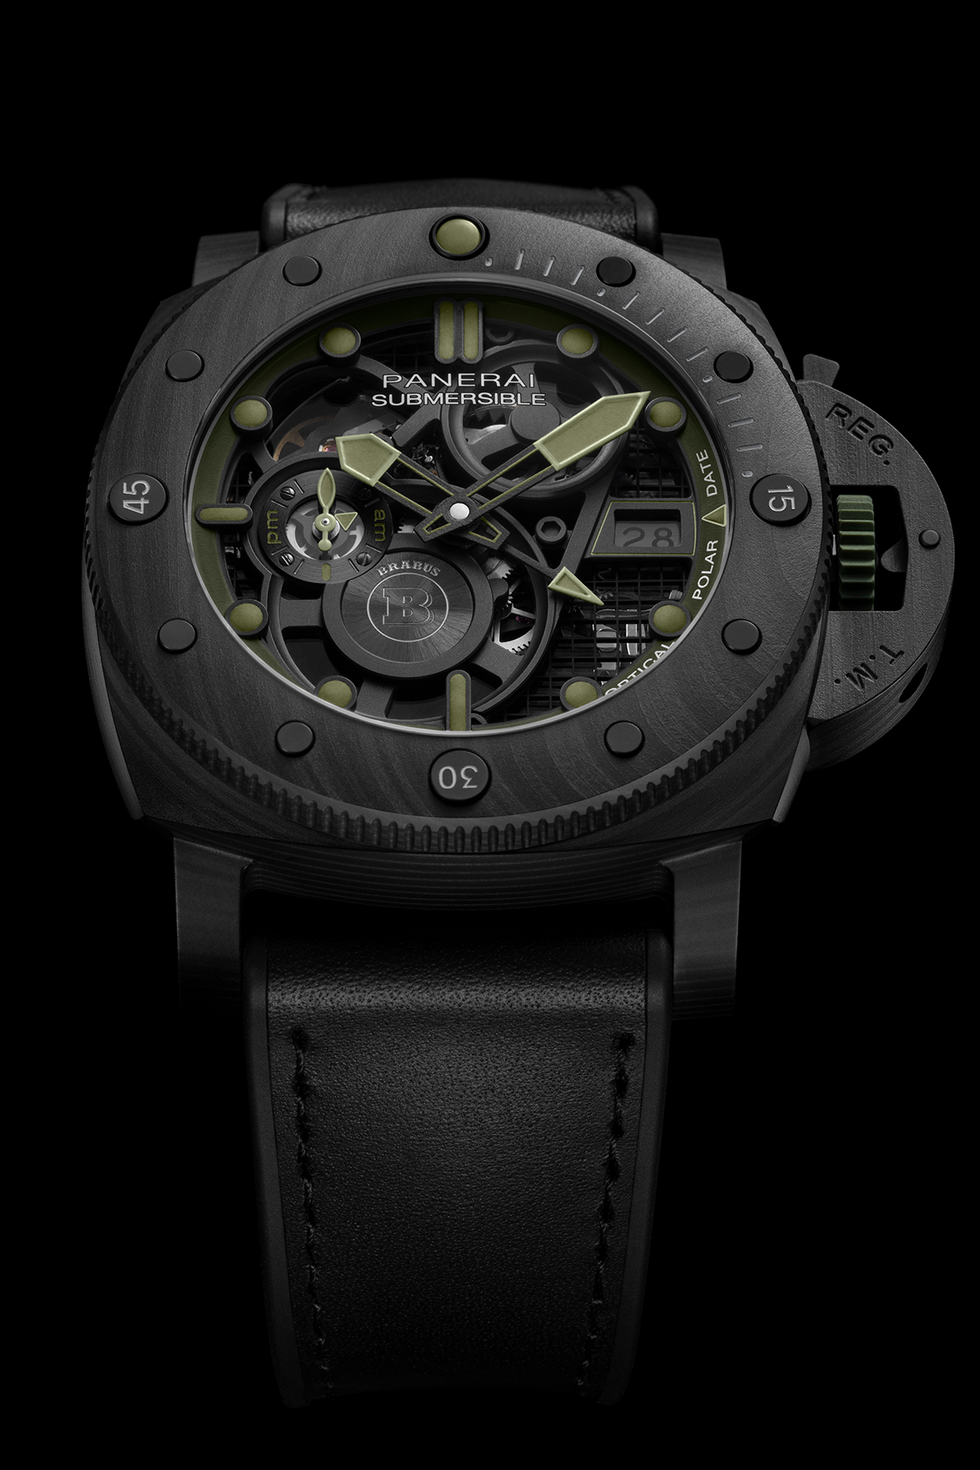 Panerai’s Brabus Watch Gets Kitted out in Military Camo